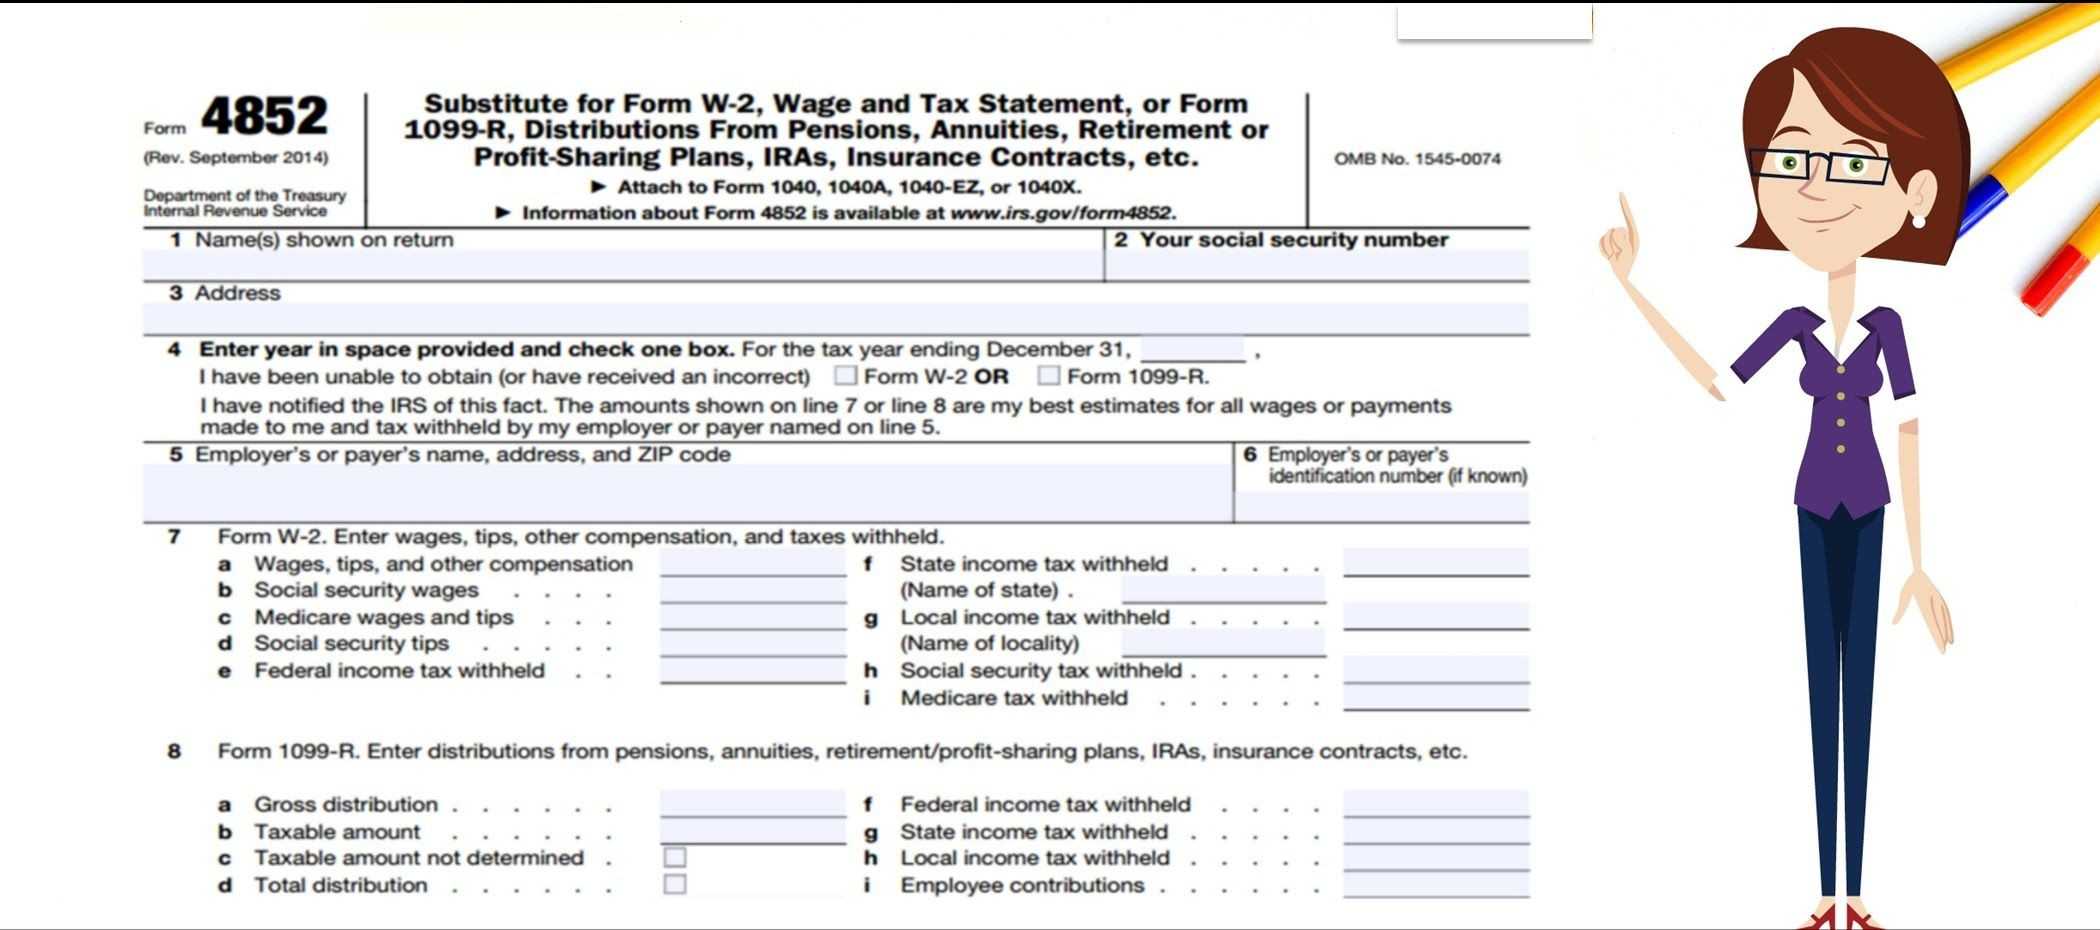 Tax Computation Worksheet 2015 together with form 1099 R Instructions Luxury top Result 70 Inspirational Irs form